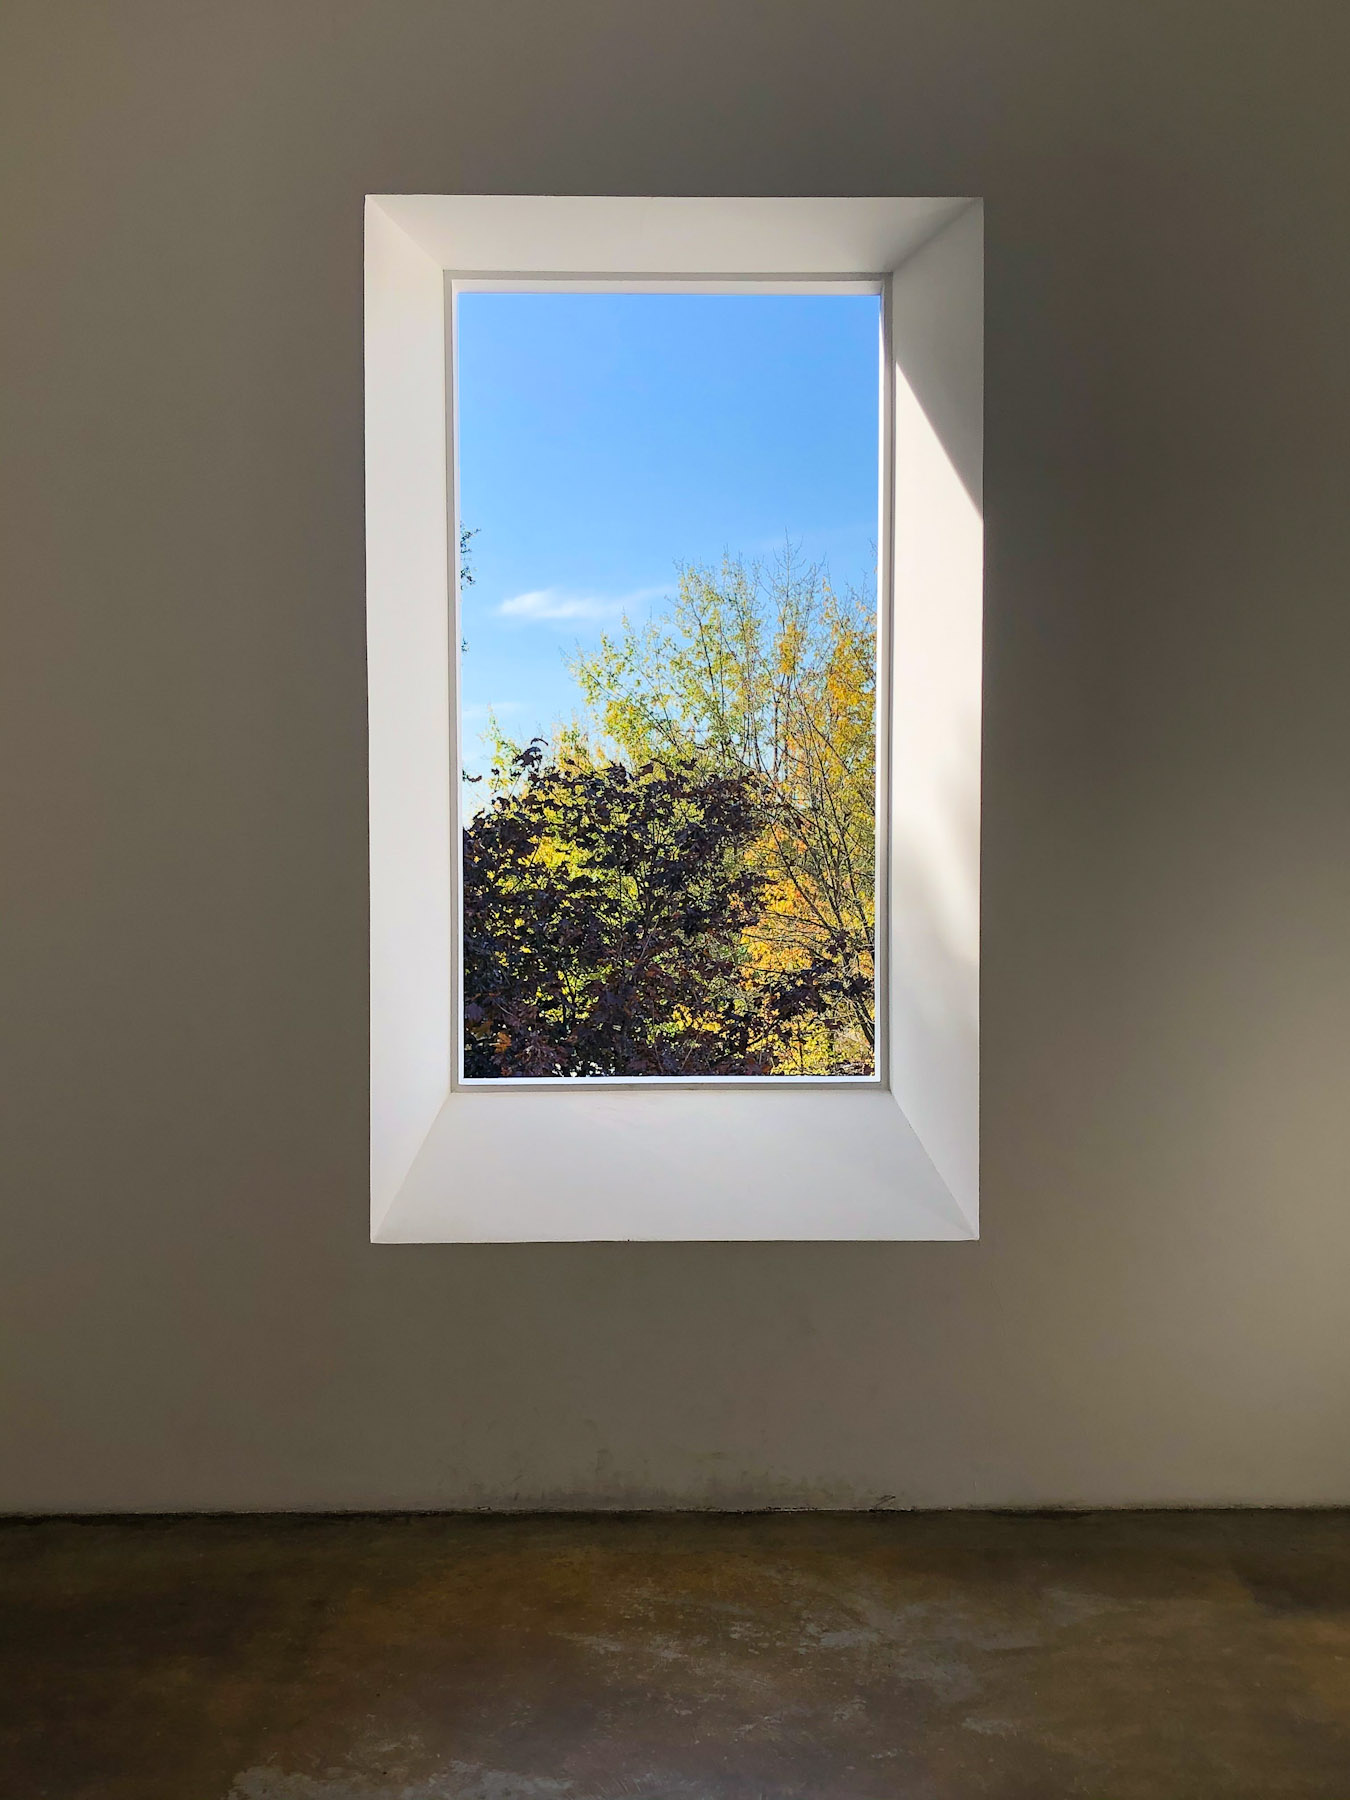 Frames of Reference by Robert Irwin, Villa Panza, Varese, Italy